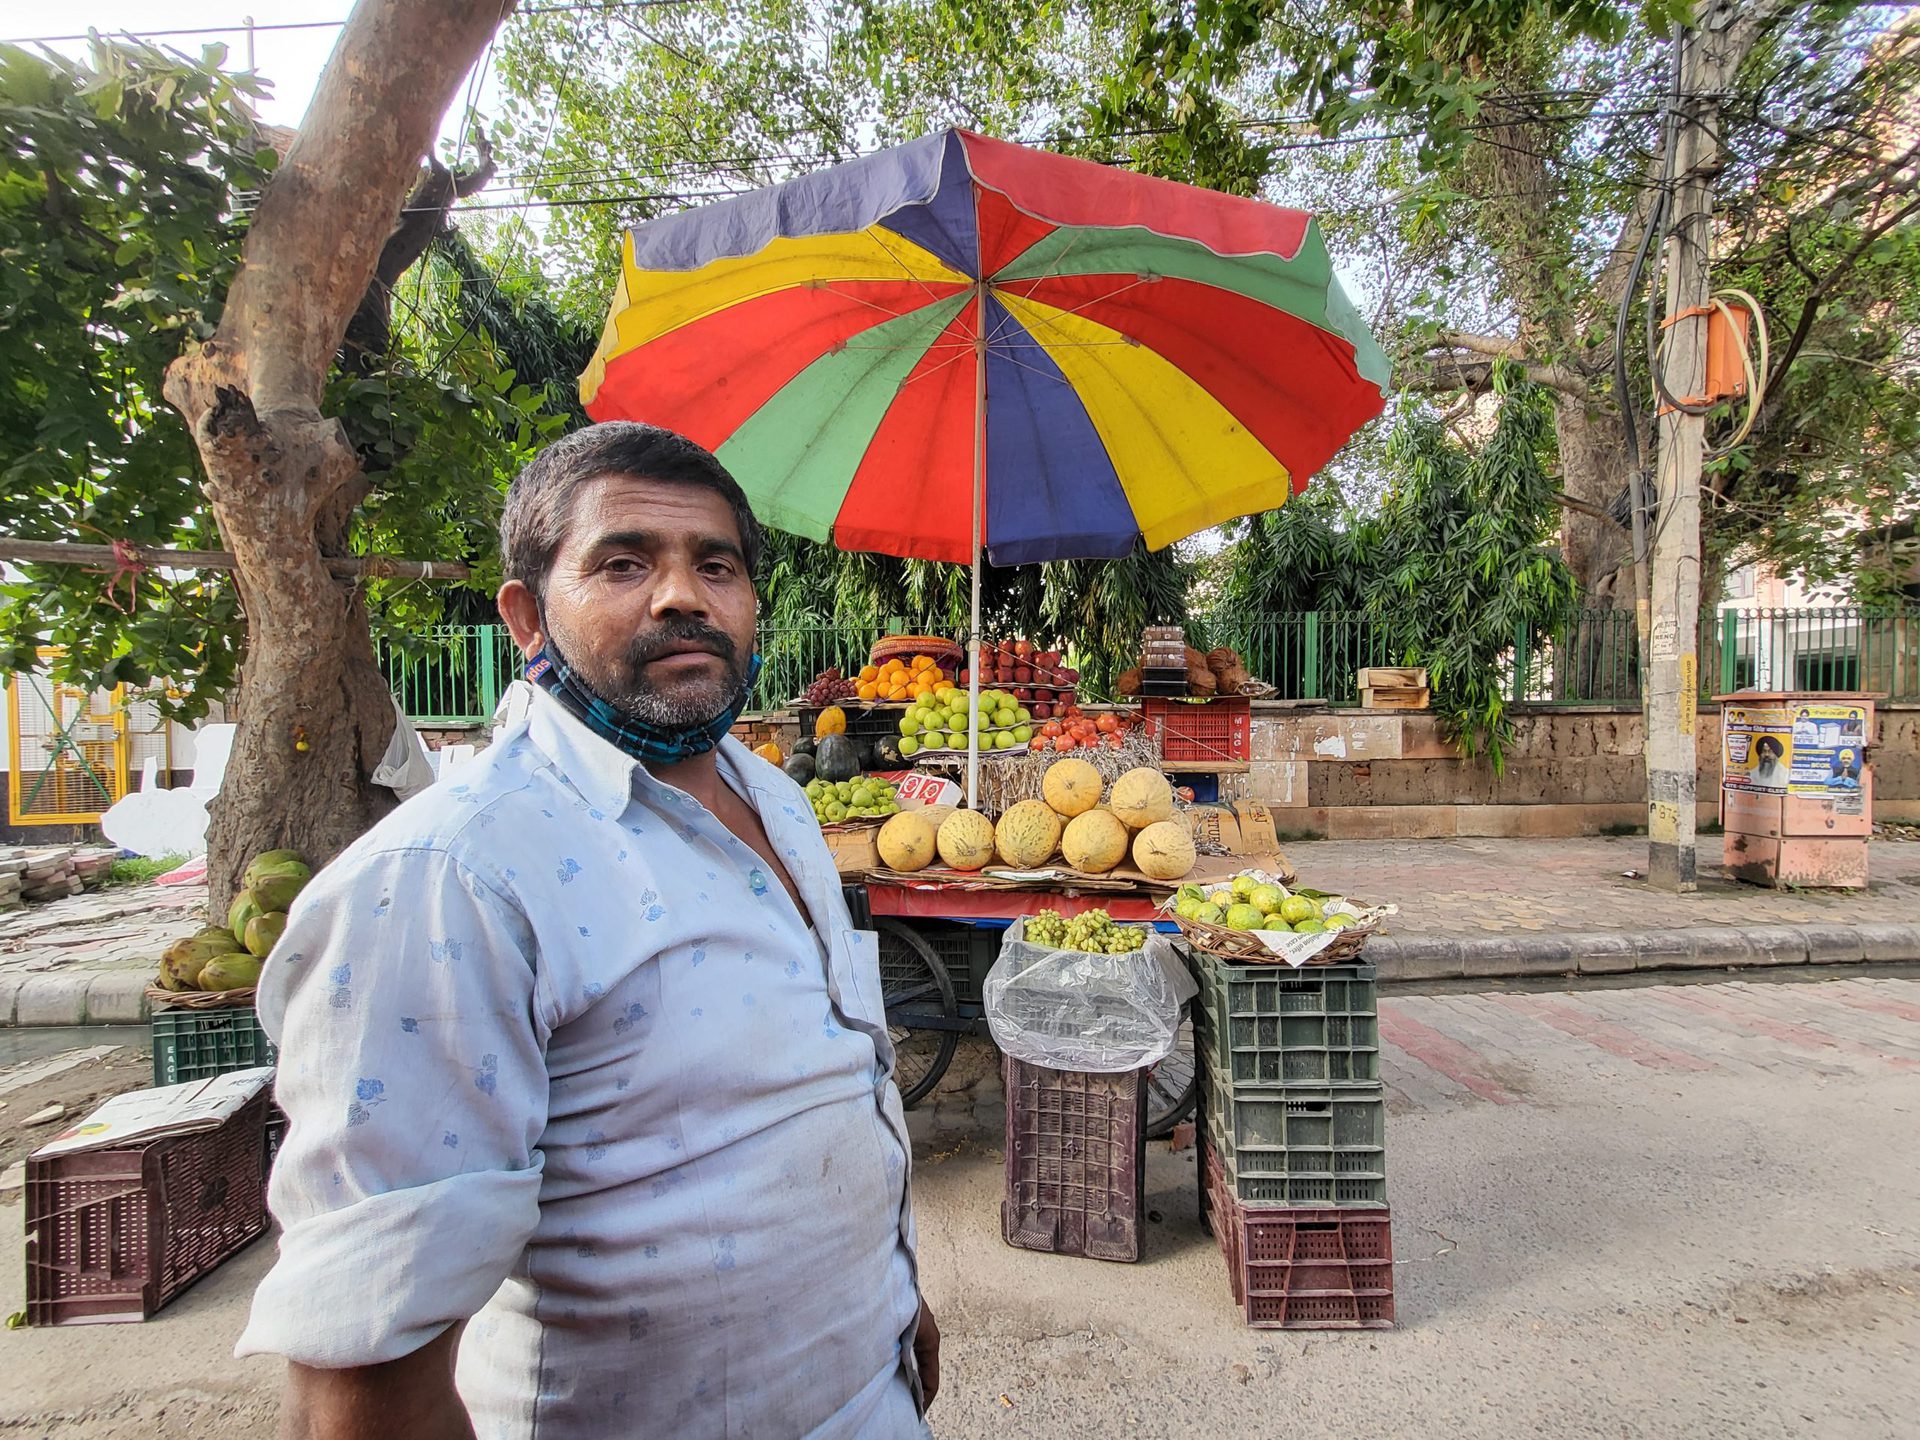 Samsung Galaxy Z Flip 3 ultrawide camera fruit seller man standing in front of his fruit stall with a colorful umbrella